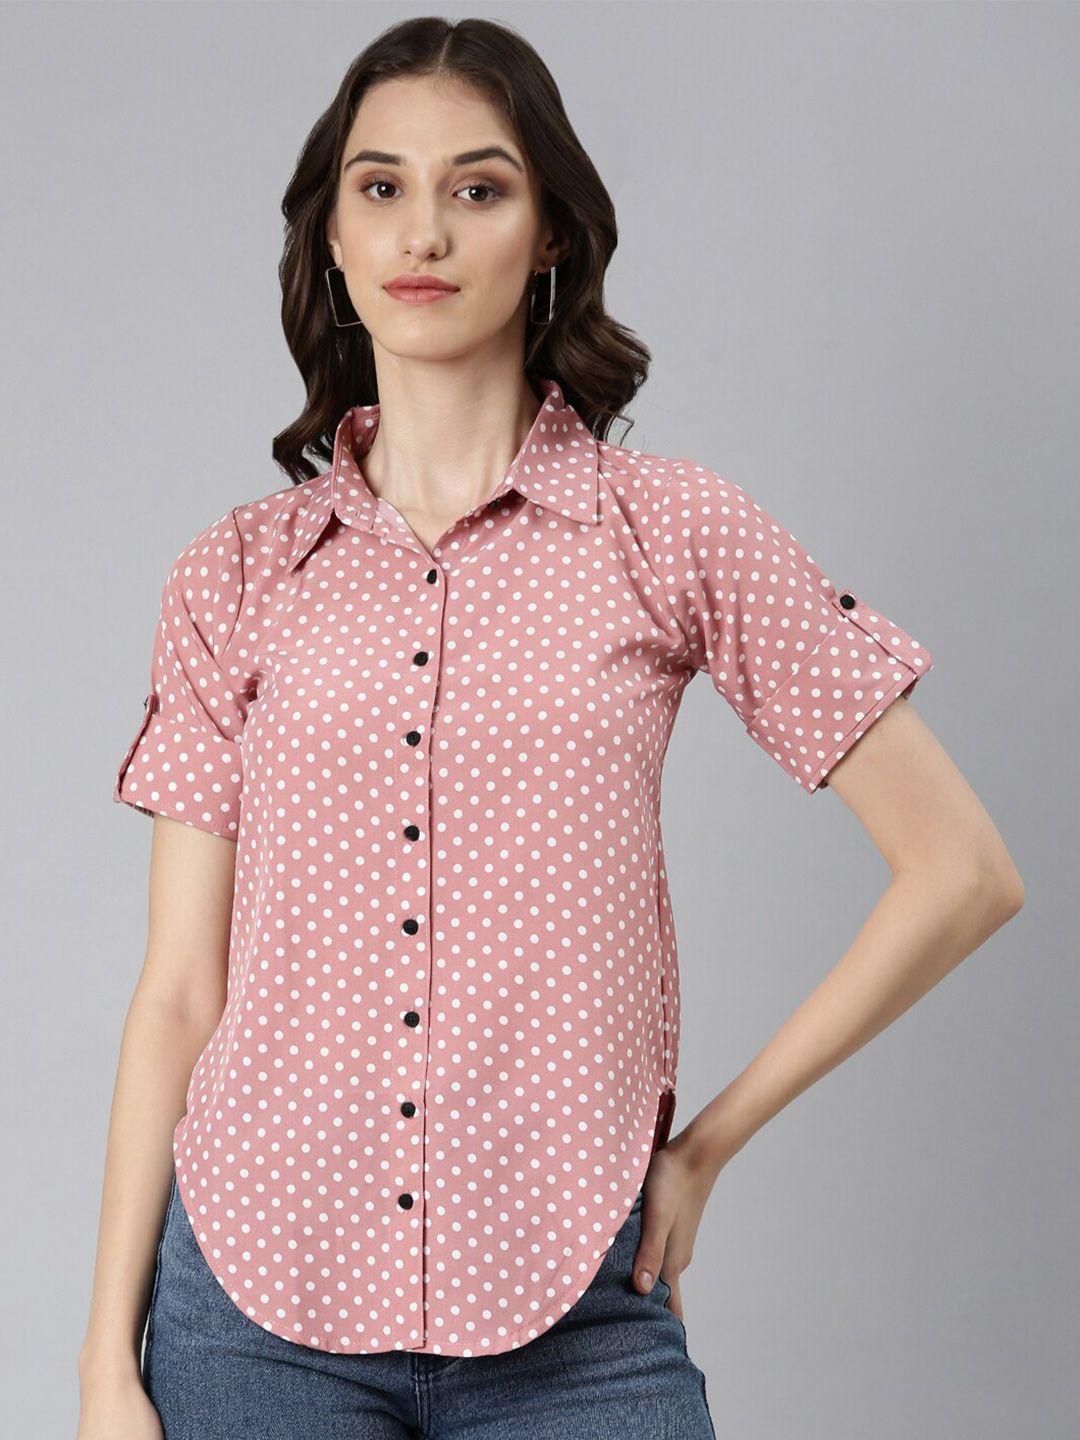 showoff slim fit opaque polka dot printed roll-up sleeves crepe casual shirt